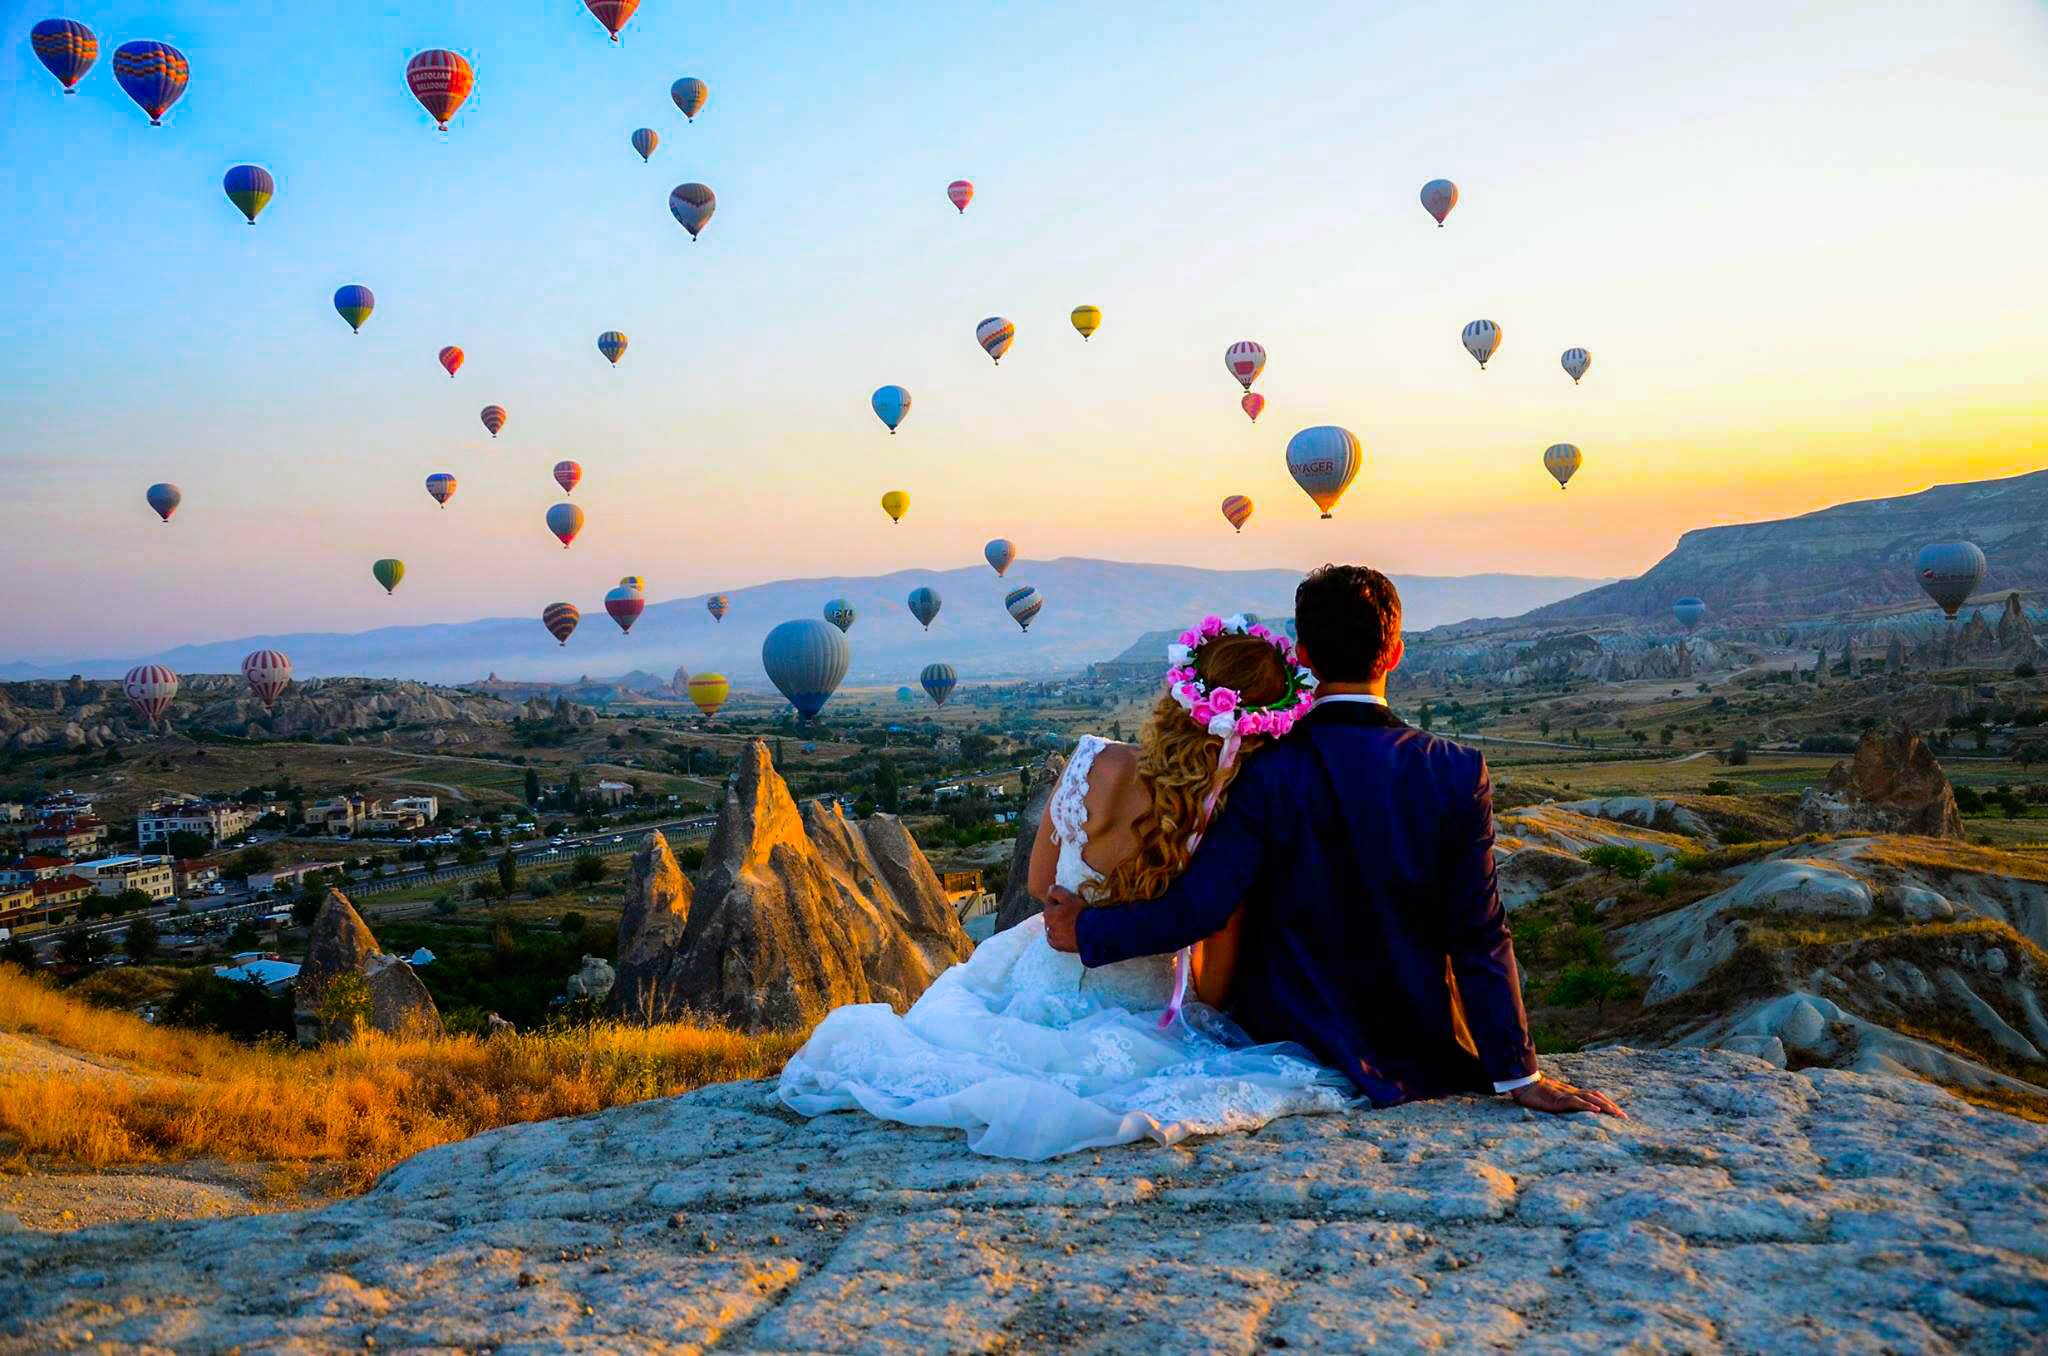 Top 10 Romantic Destinations for Couples Add to